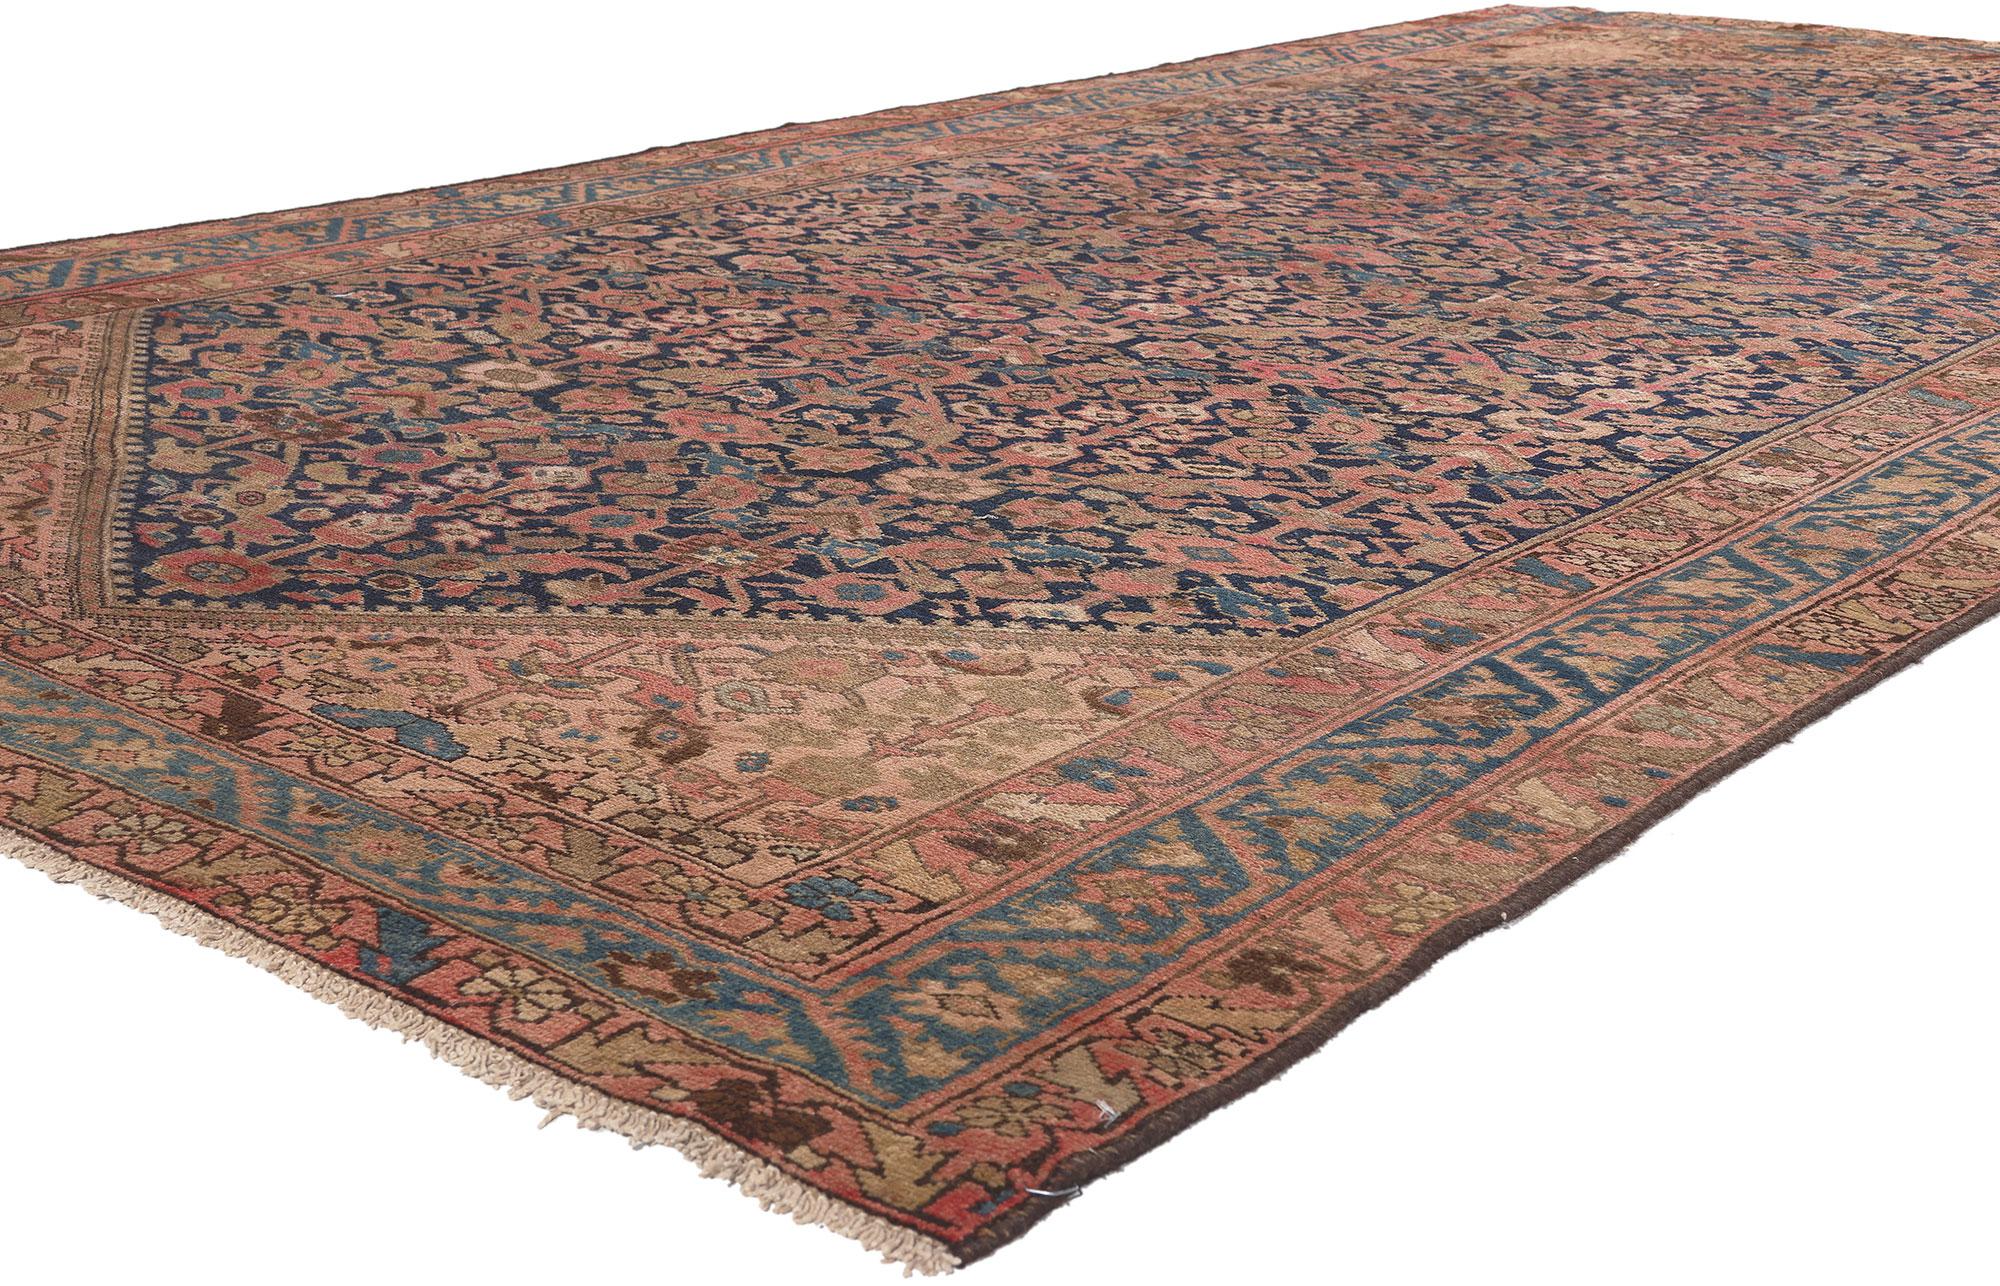 75374 Antique Persian Malayer Rug, 06'03 x 11'09.
Laid-back luxury meets rustic sensibility in this antique Persian Malayer rug. The Guli Henna floral design and rich earthy hues woven into this piece work together cultivating a timeless appeal with